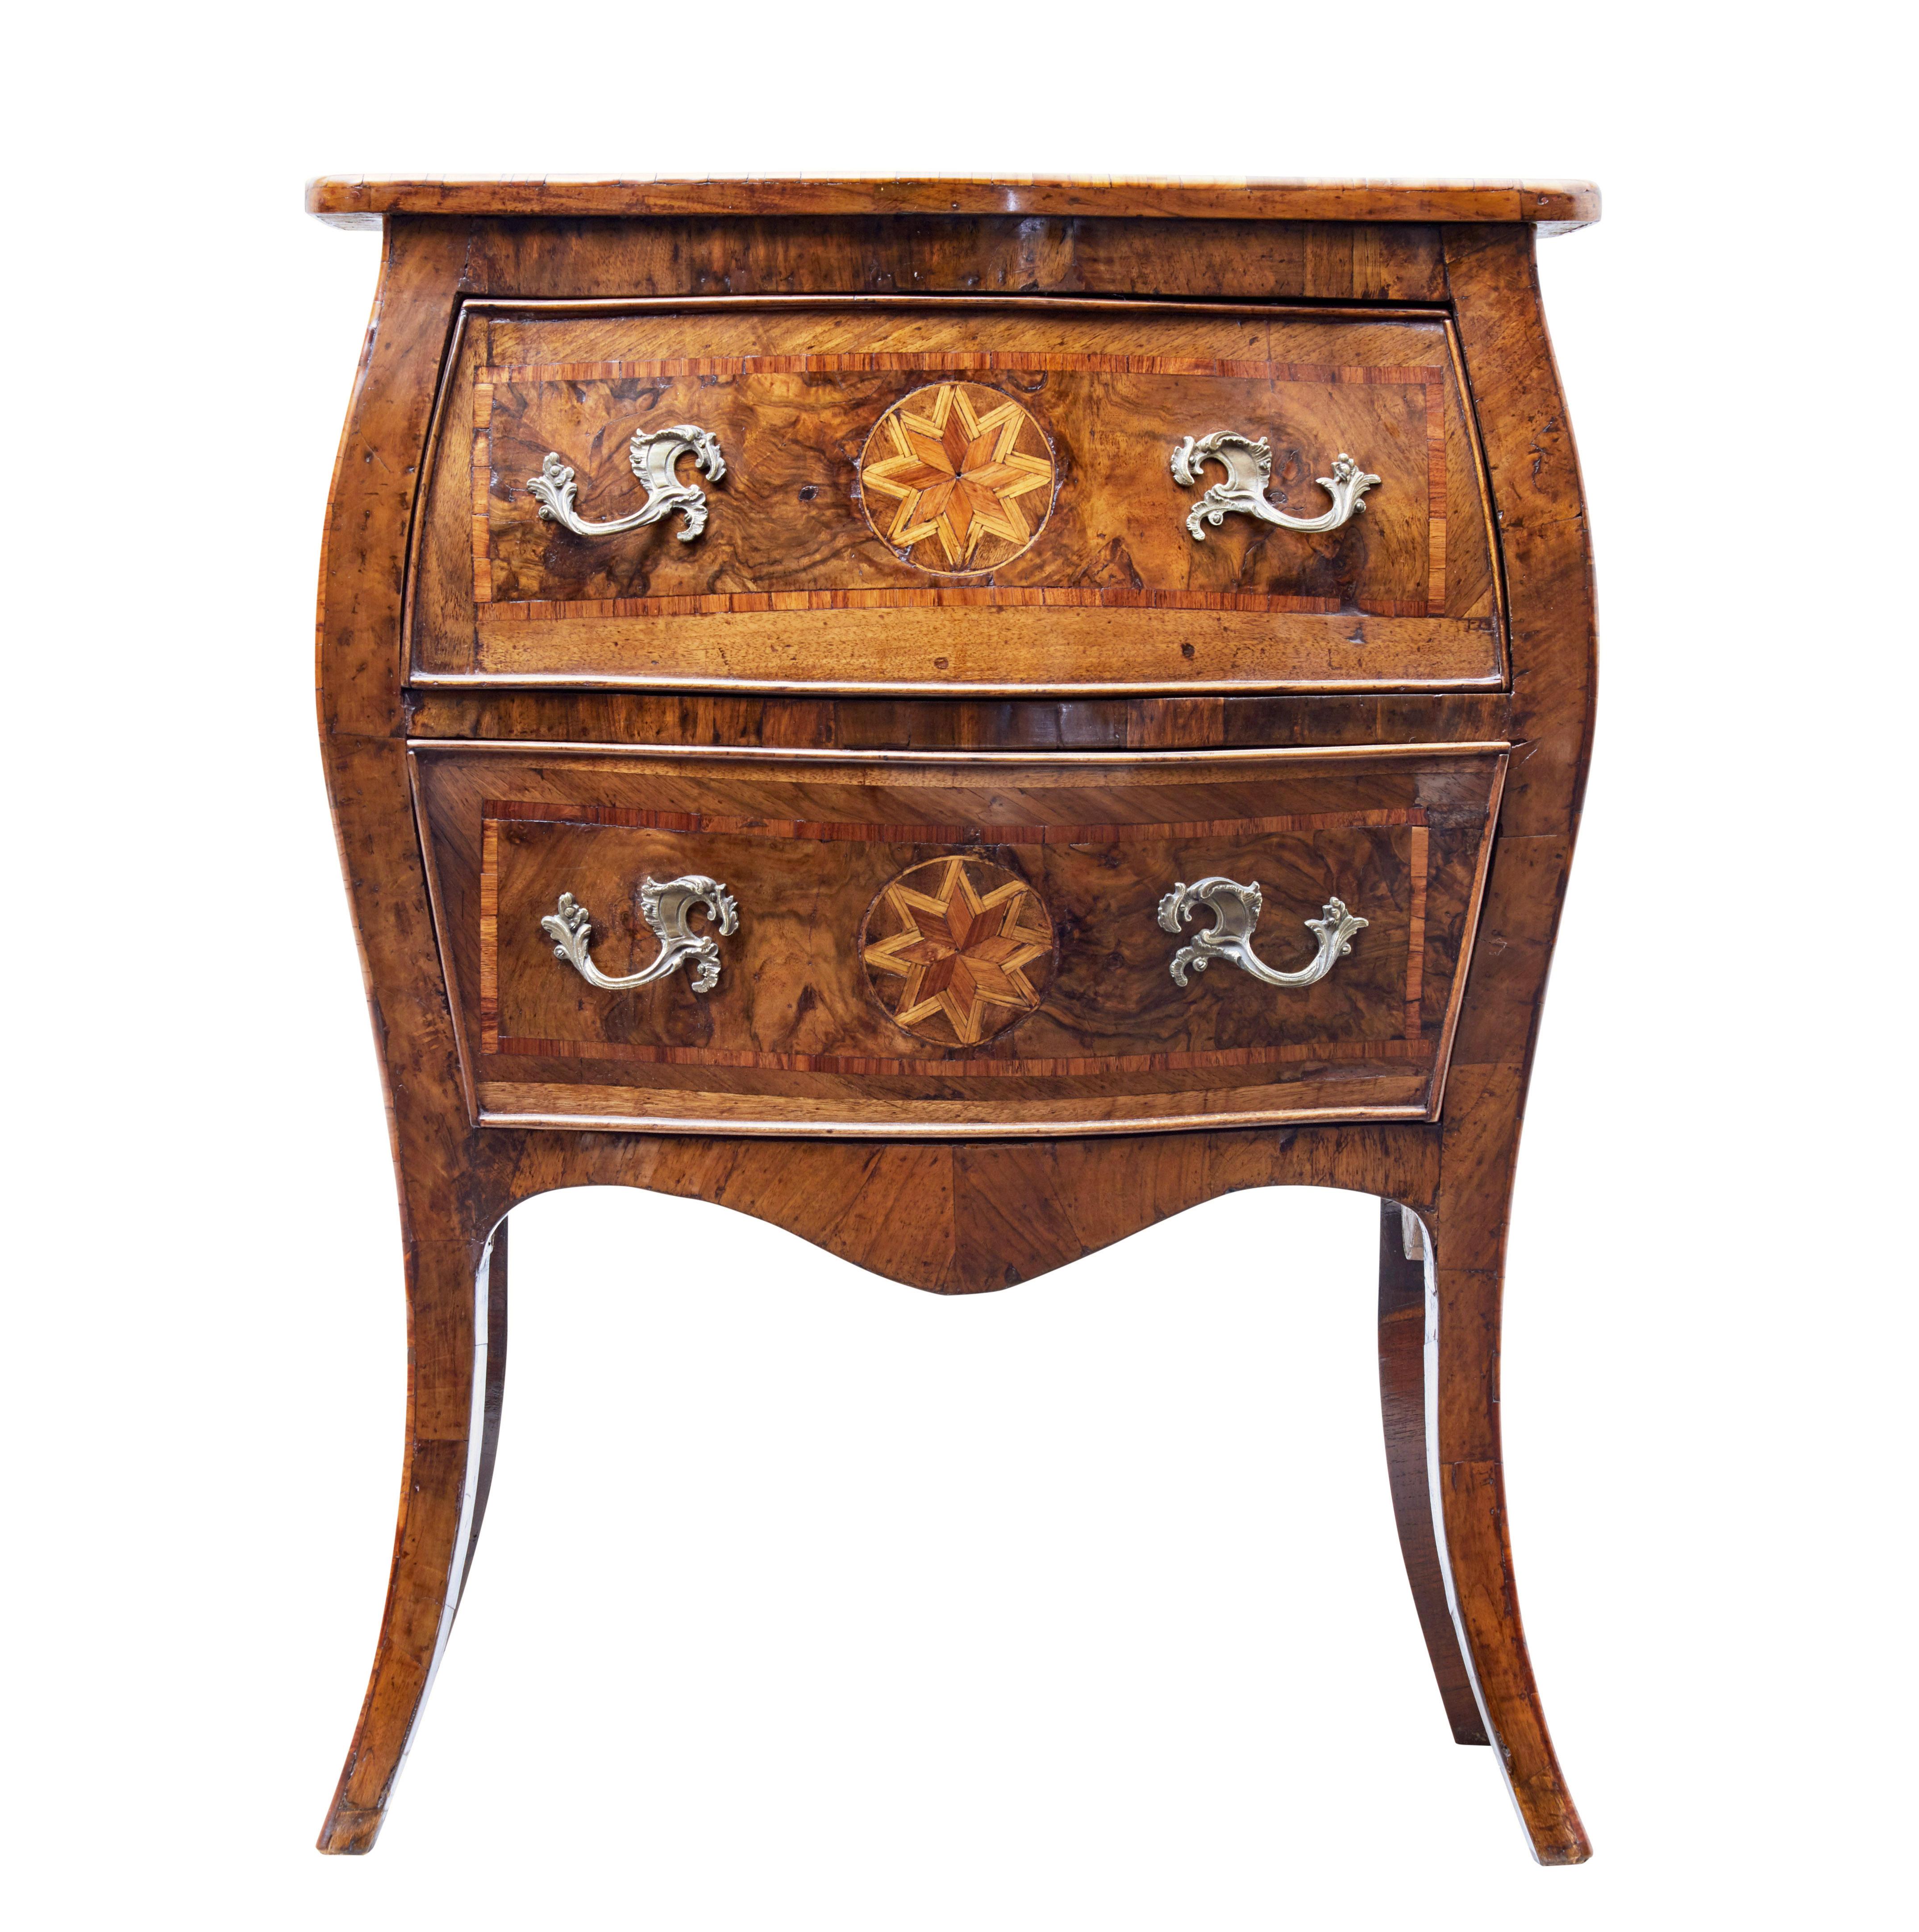 Mid 19th century walnut inlaid maltese commode circa 1850.

Delightful maltese inlaid commode of small proportions.

Inlaid and cross banded with various exotic woods.  Star motif to the top surface, drawer fronts and sides.  2 deep drawers with